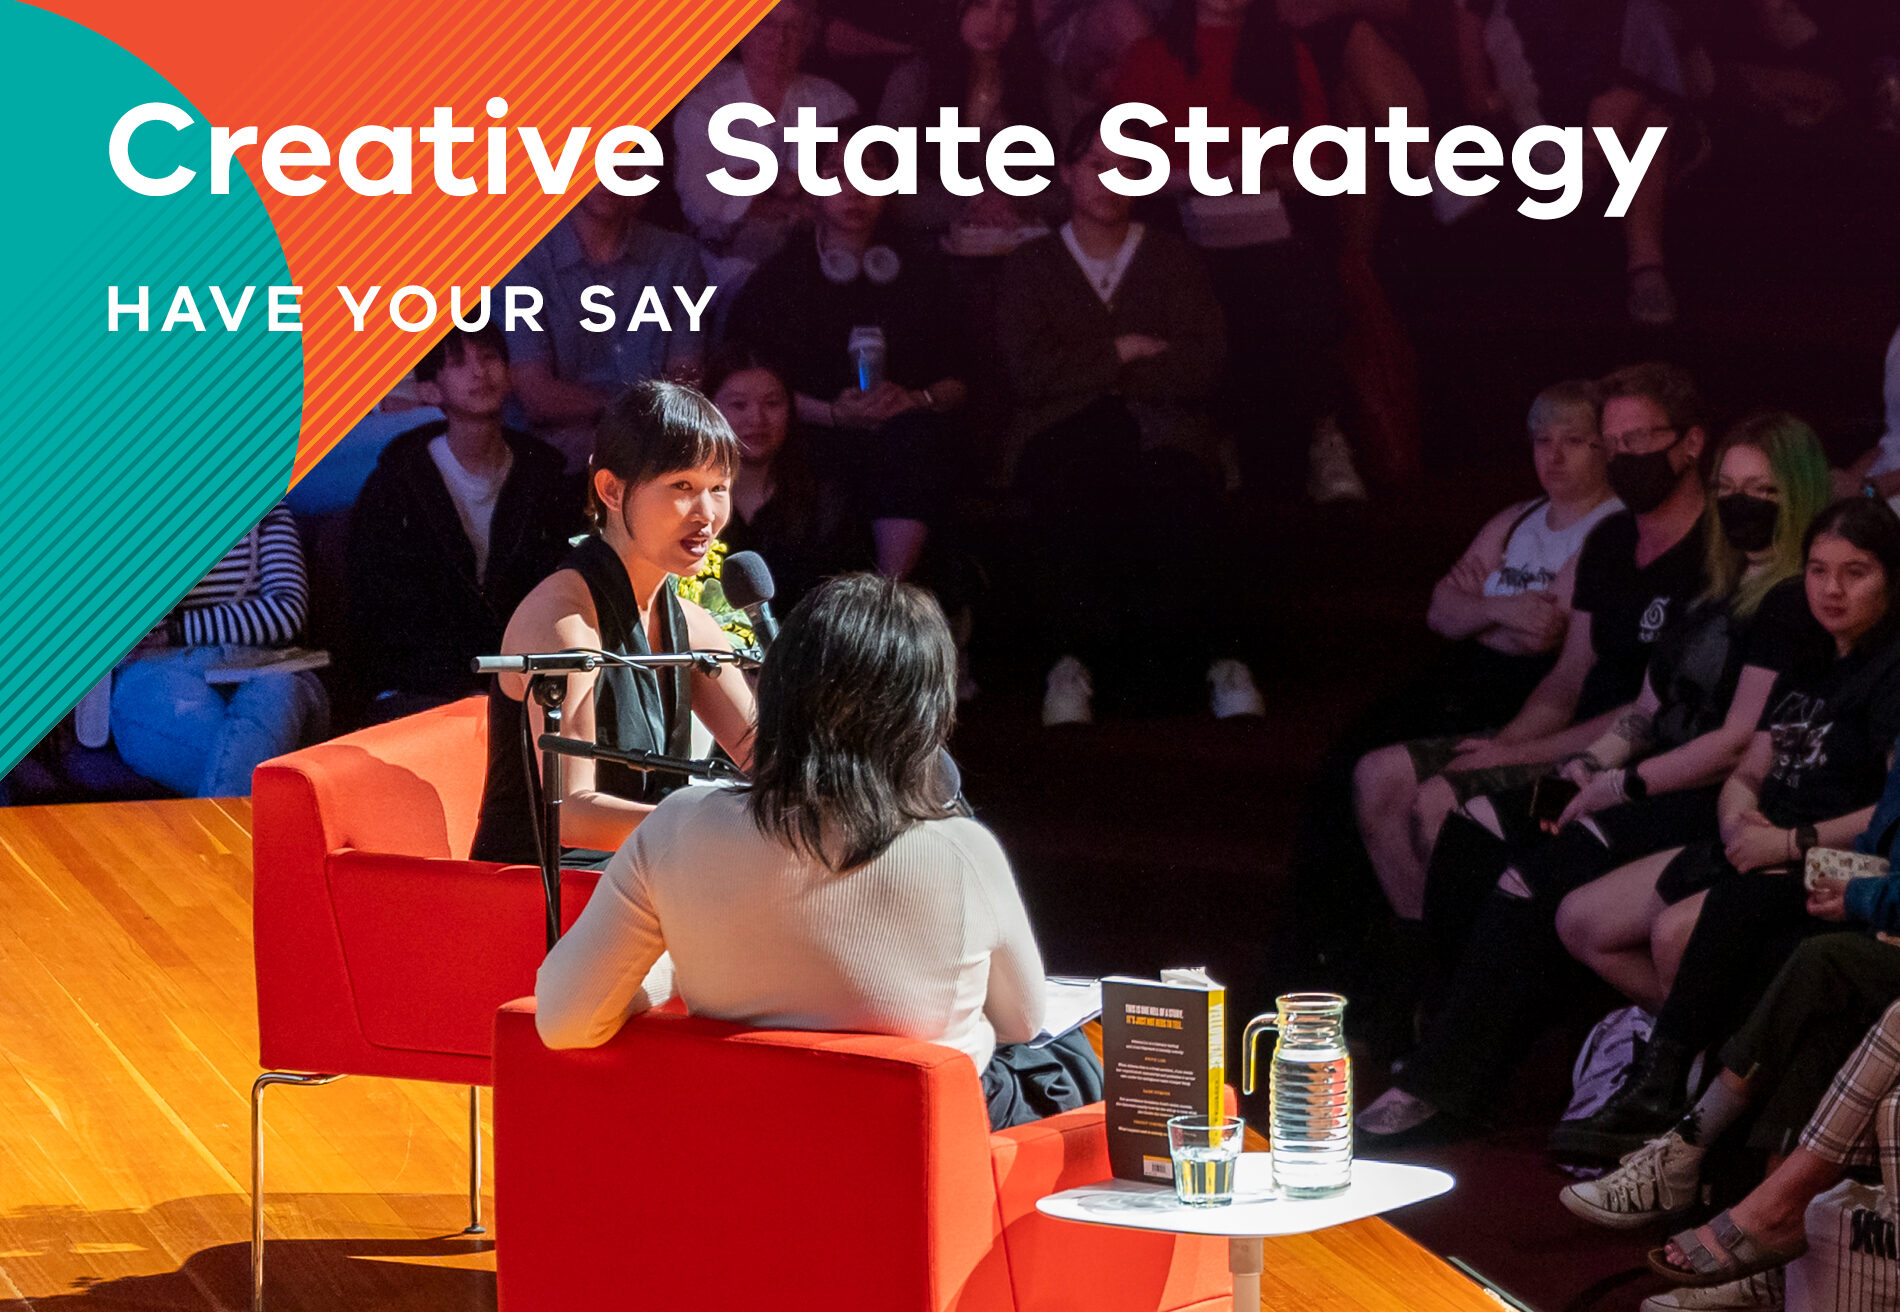 Text: Creative State Strategy, have your say. Photo of two people talking on stage with the audience looking on.